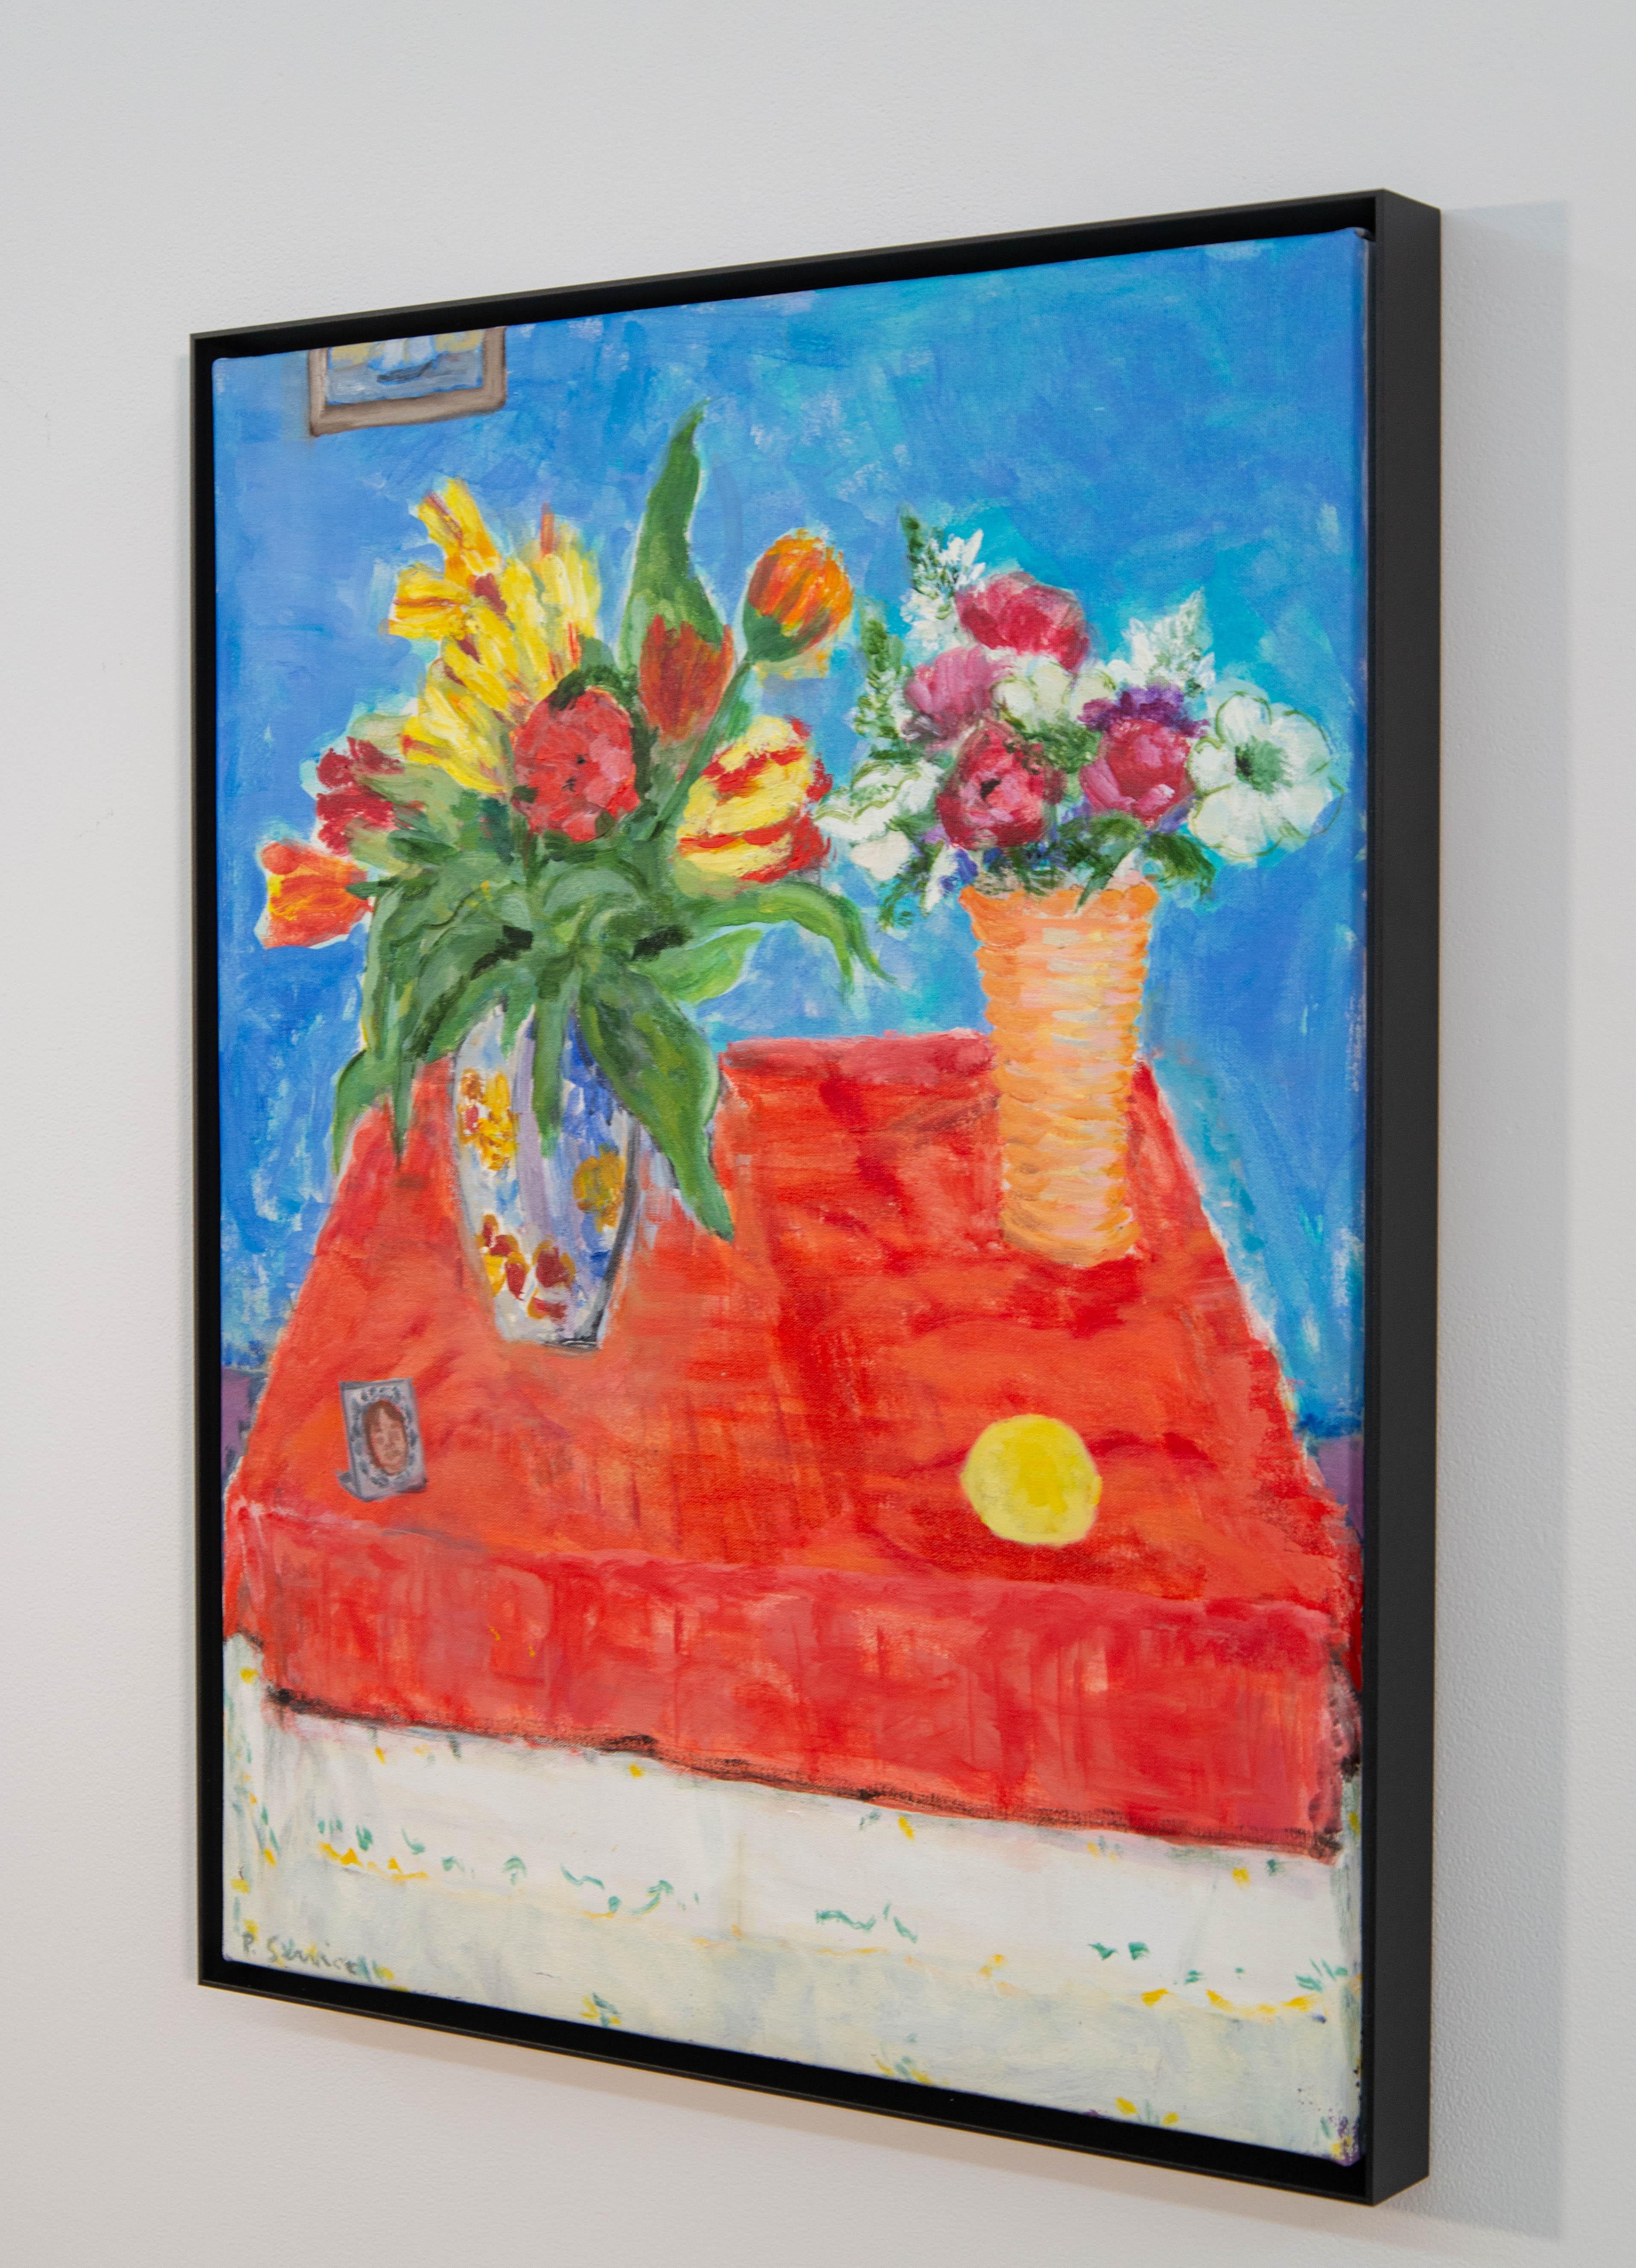 My Favourite Orange Silk Cloth - floral still life, acrylic and oil on canvas - Painting by Pat Service